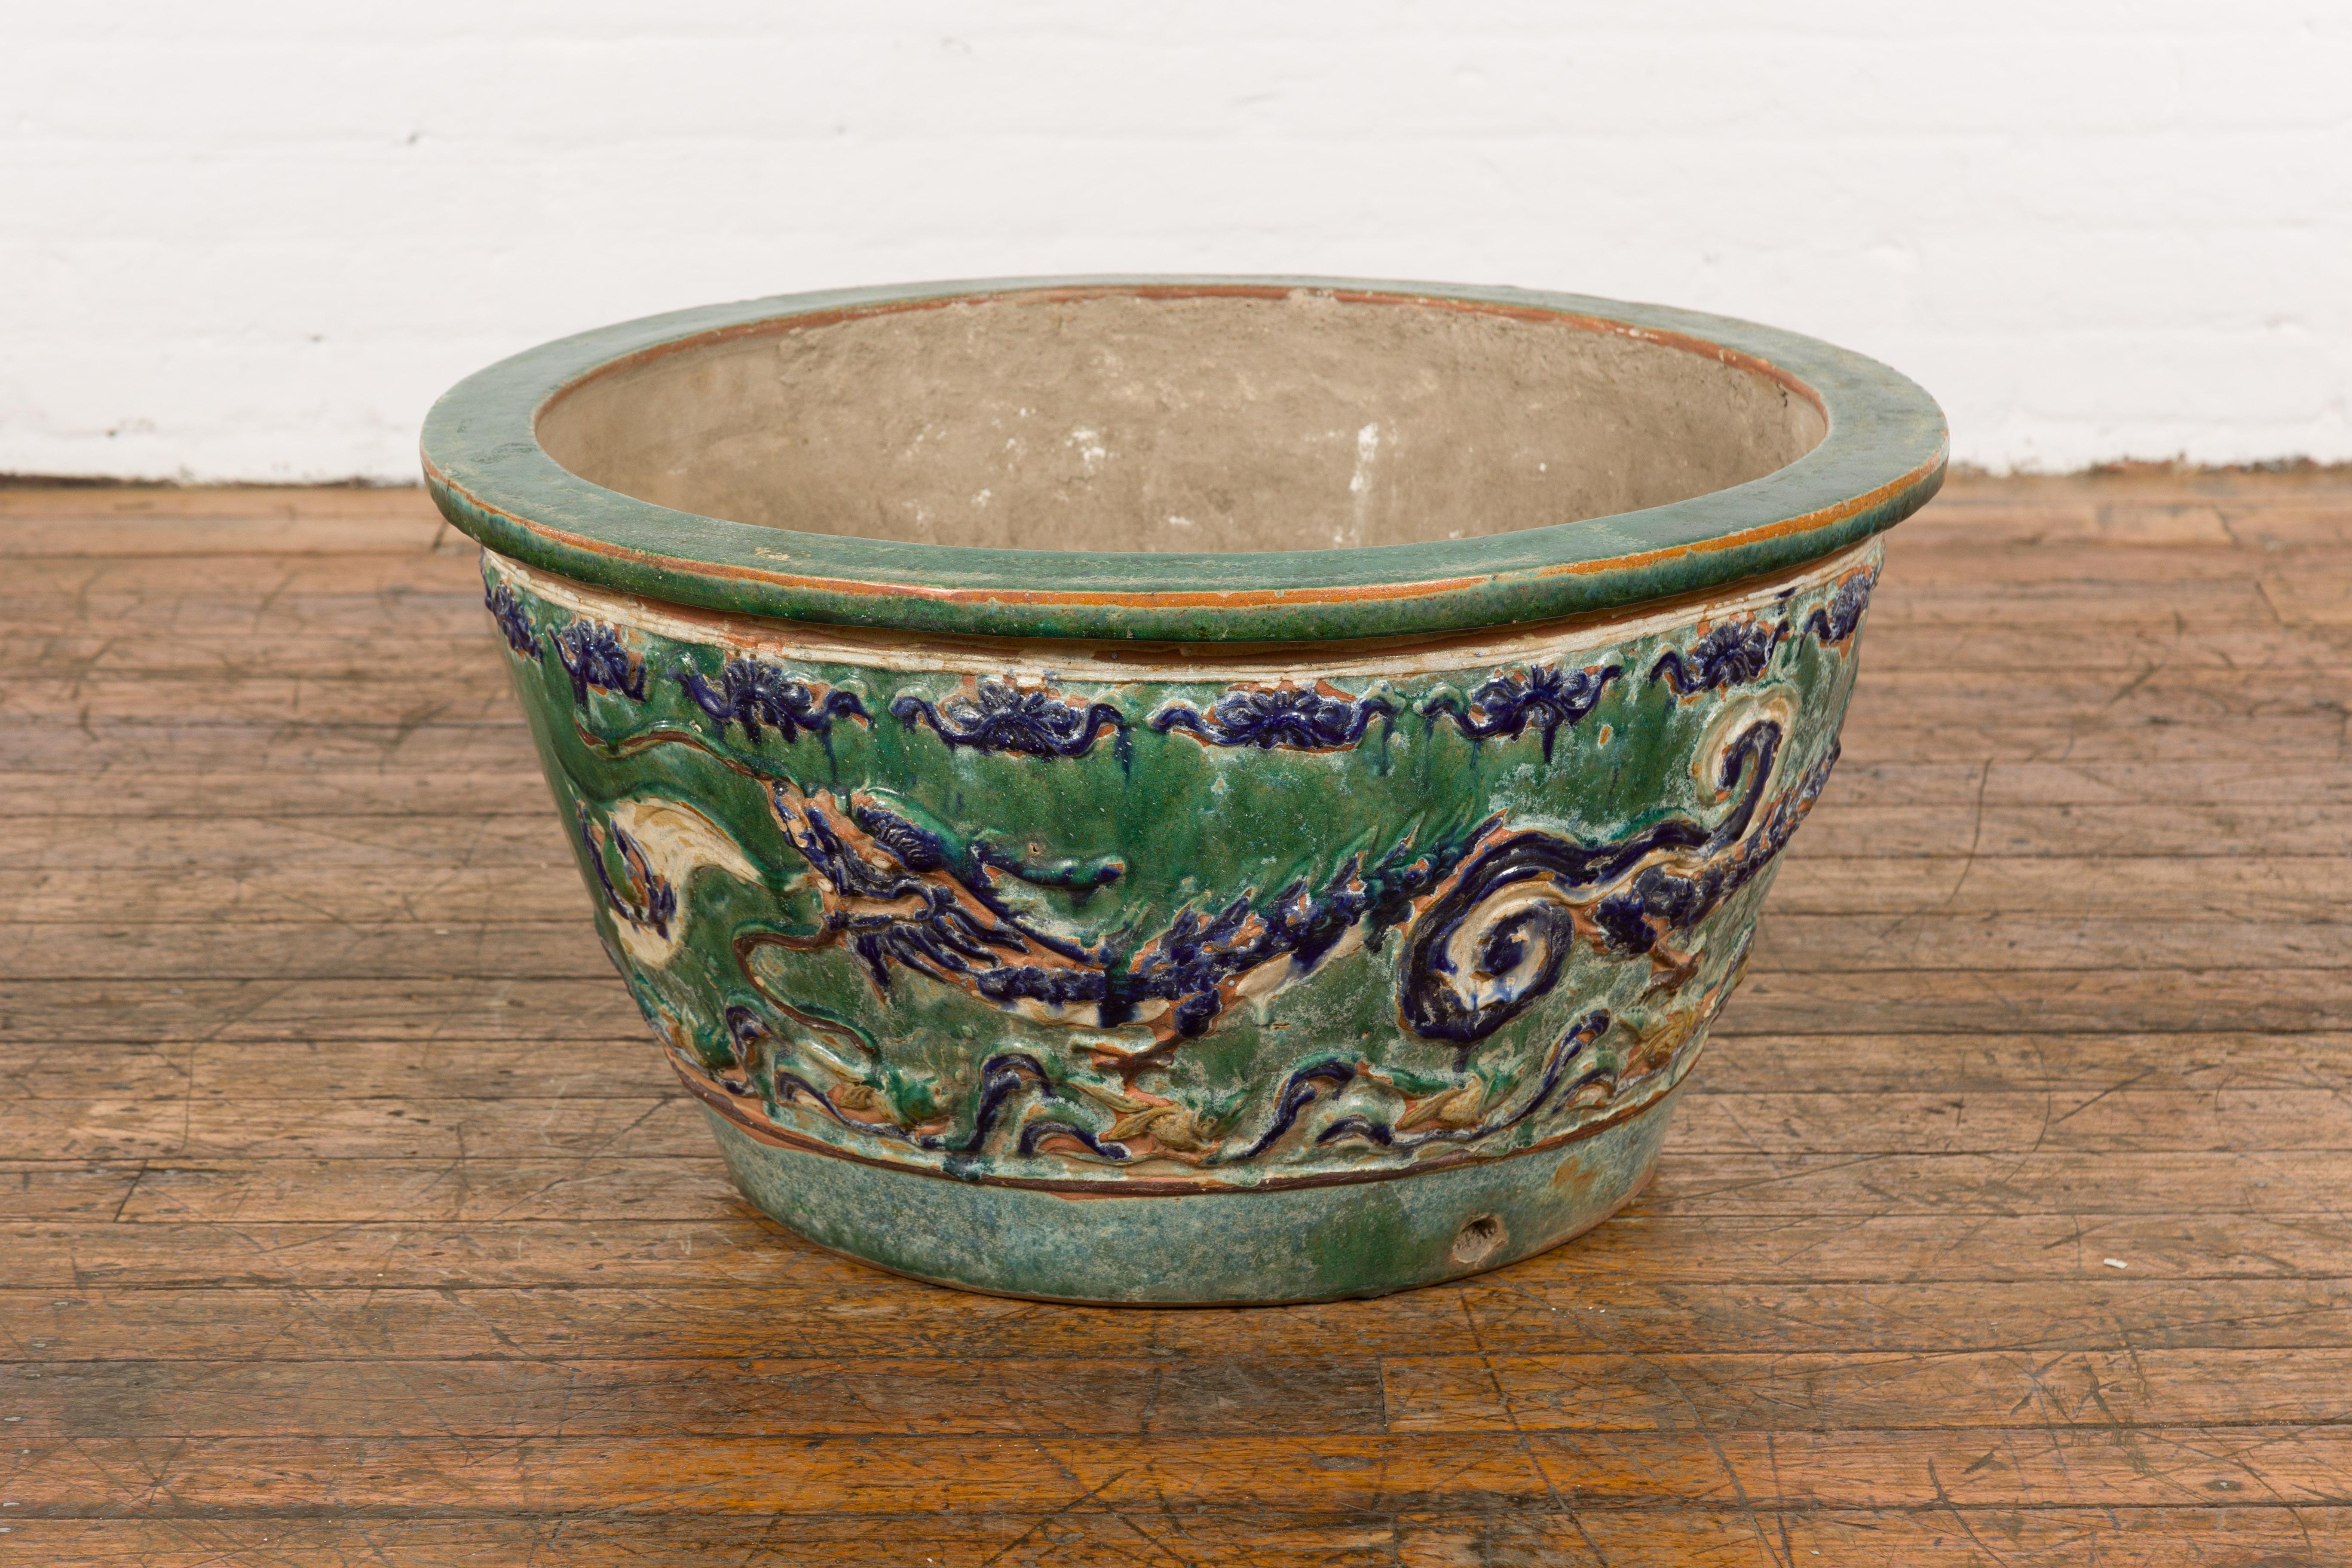 An antique 19th century Annamese green and blue planter from Vietnam with dragon, female figure, large scrolling clouds, foliage, distressed patina and petite evacuation hole in the front. Introducing a captivating piece from the 19th century, this